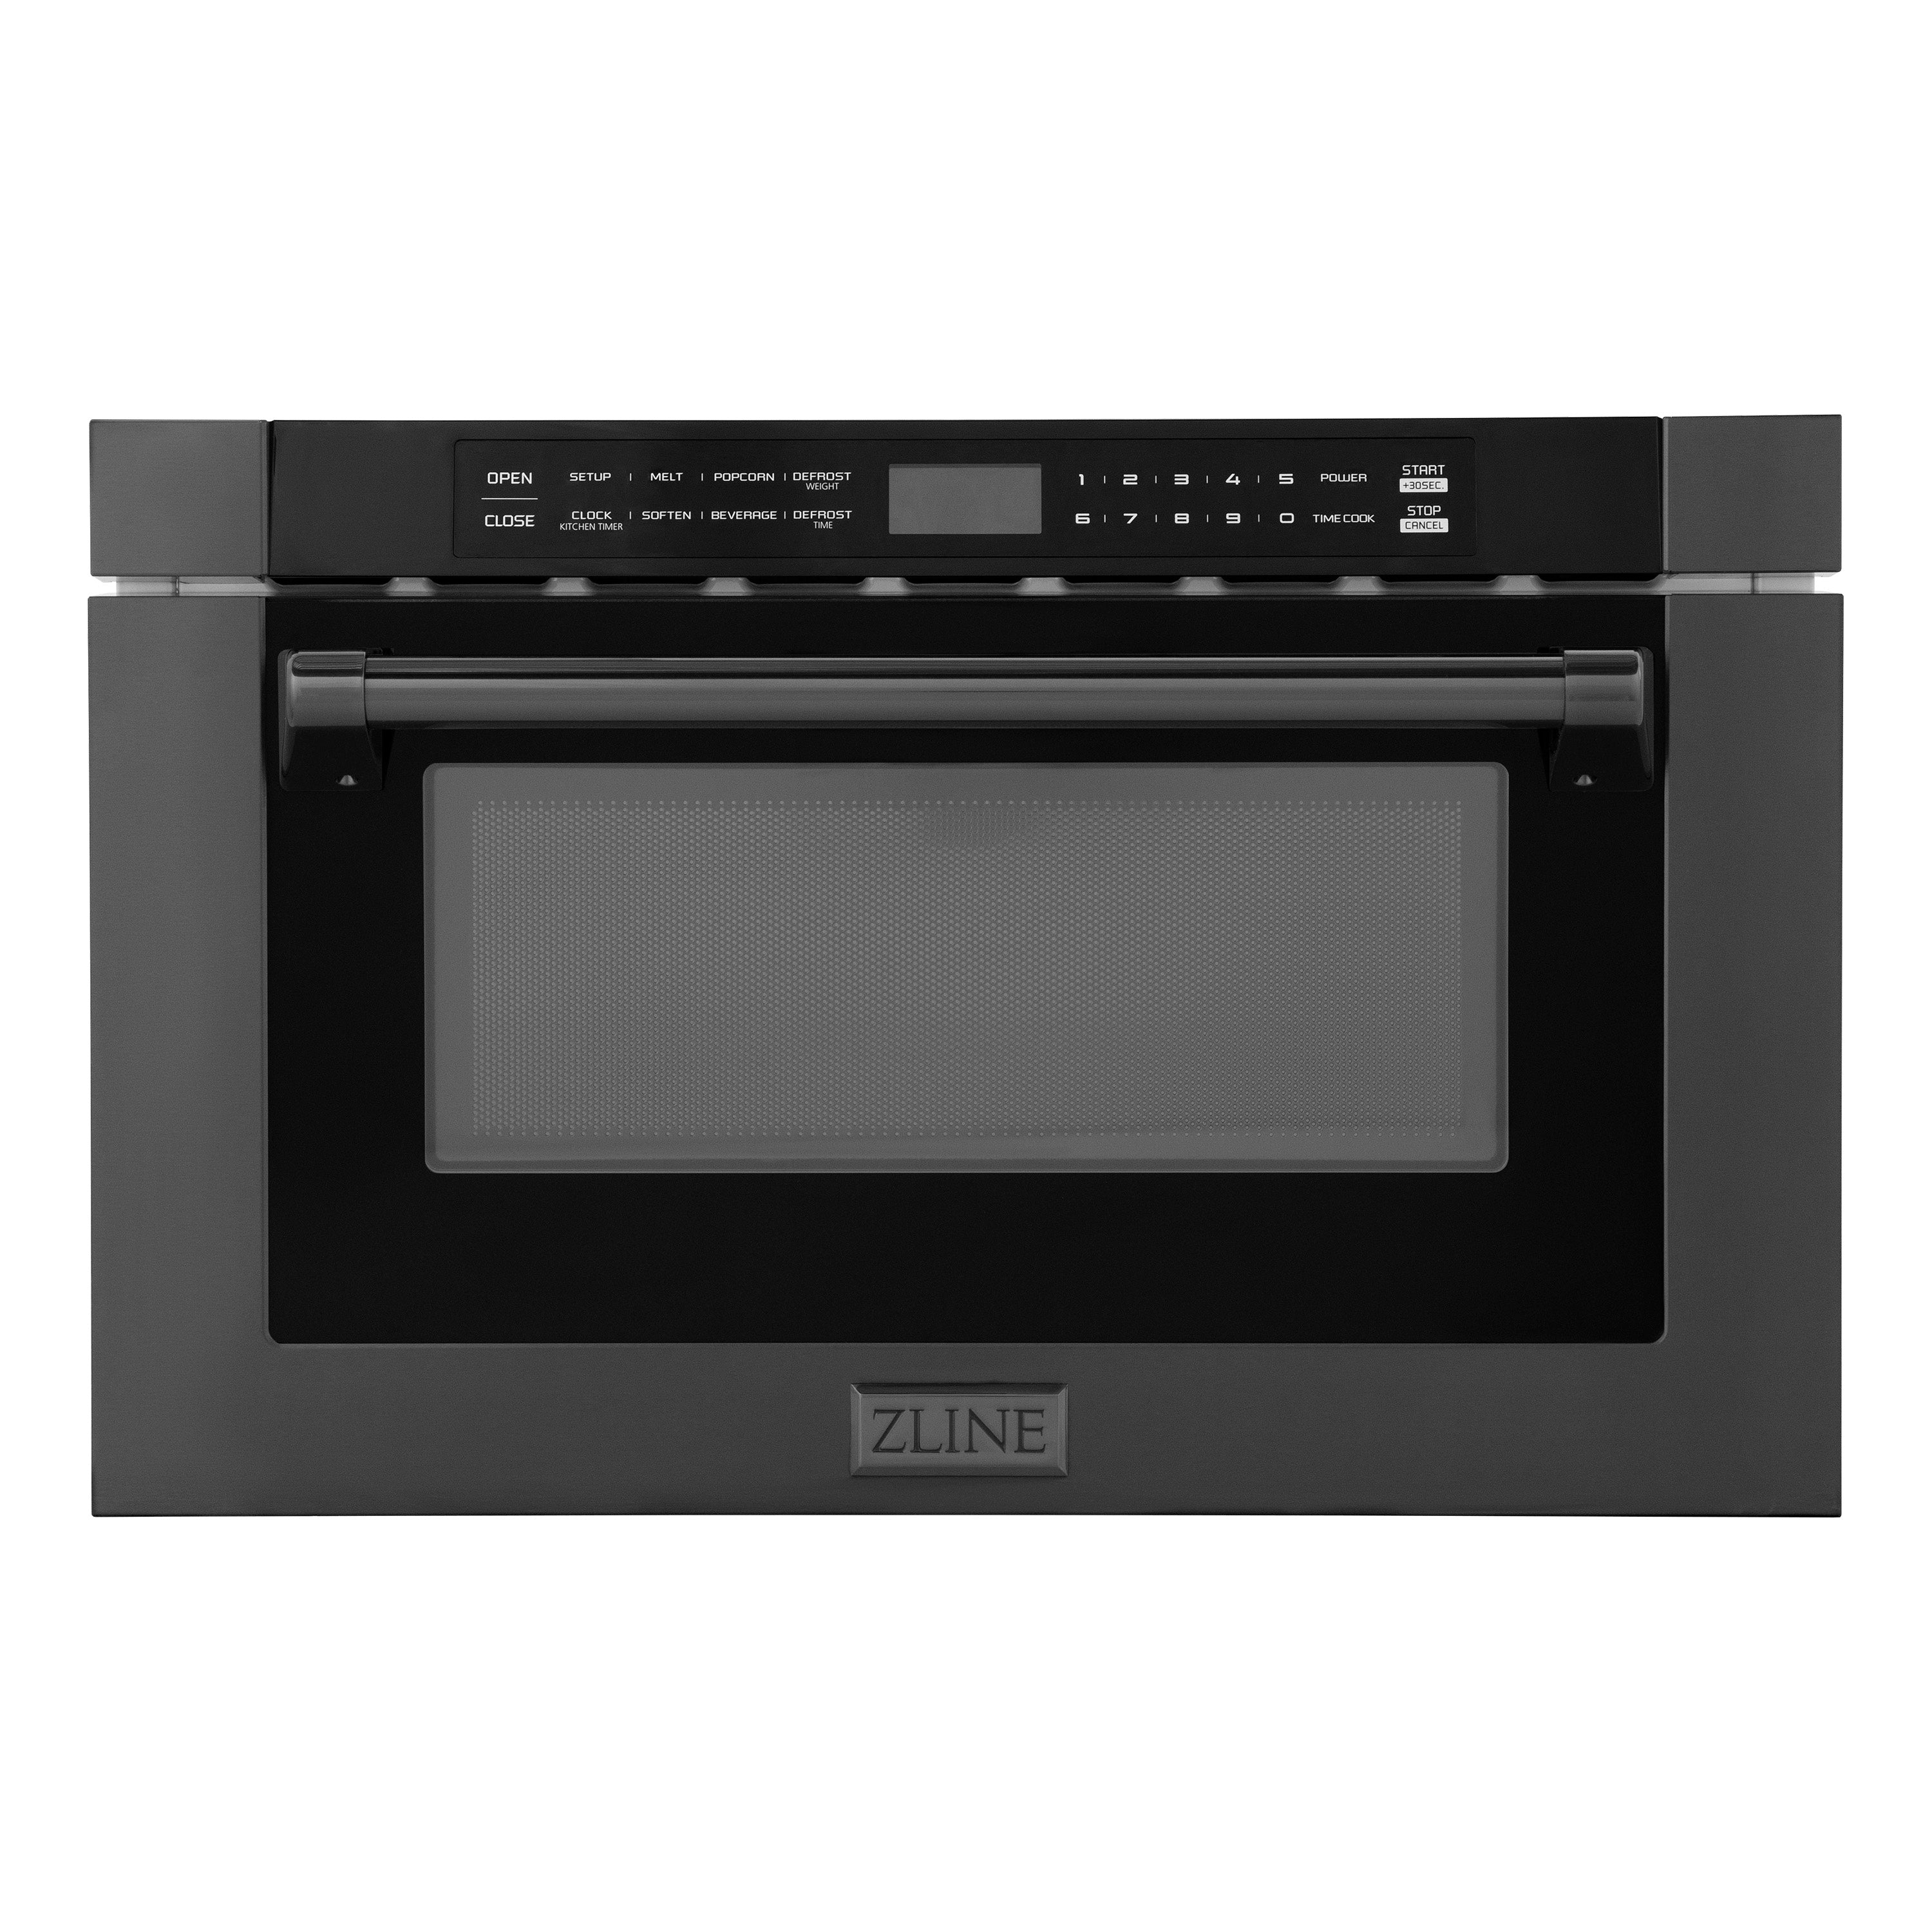 ZLINE 24" 1.2 cu. ft. Built-in Microwave Drawer with a Traditional Handle in Black Stainless Steel (MWD-1-BS-H) - New Star Living